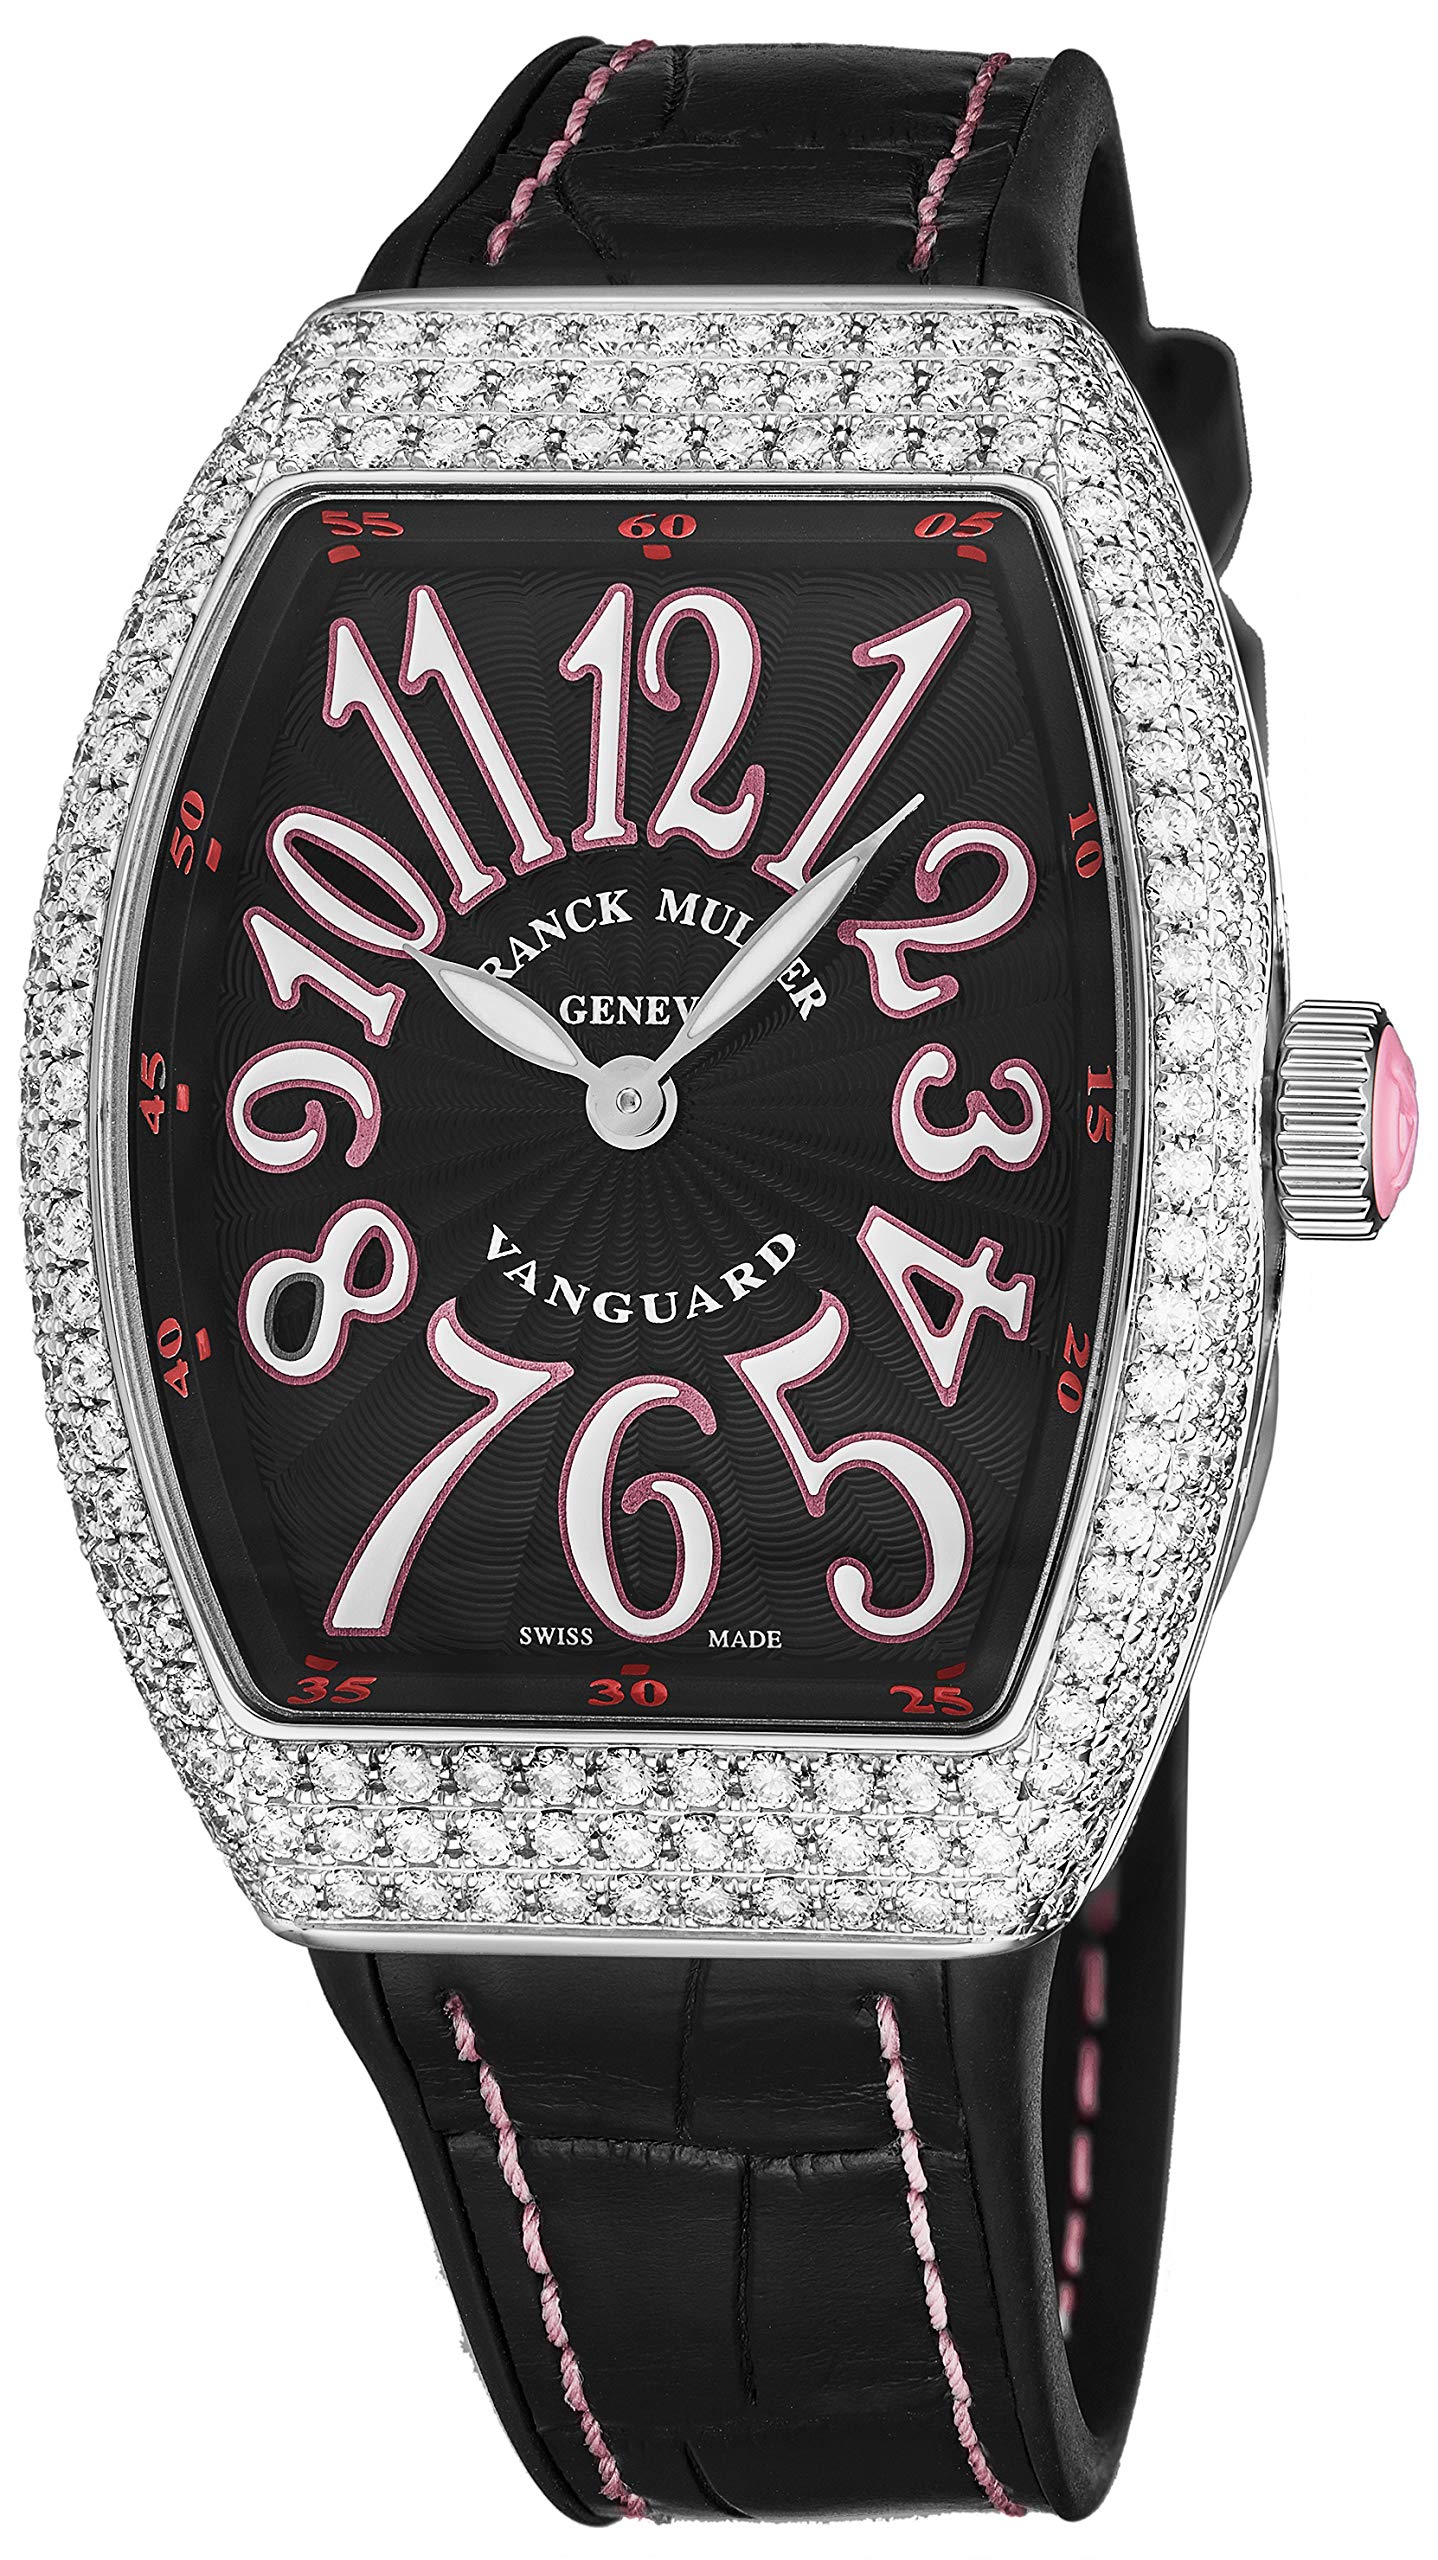 Franck Muller Vanguard Diamond Womens Swiss Quartz Watch - Tonneau Black Face with Luminous Hands and Sapphire Crystal - Black Leather/Rubber Strap Ladies Watch V 32 SC at FO D